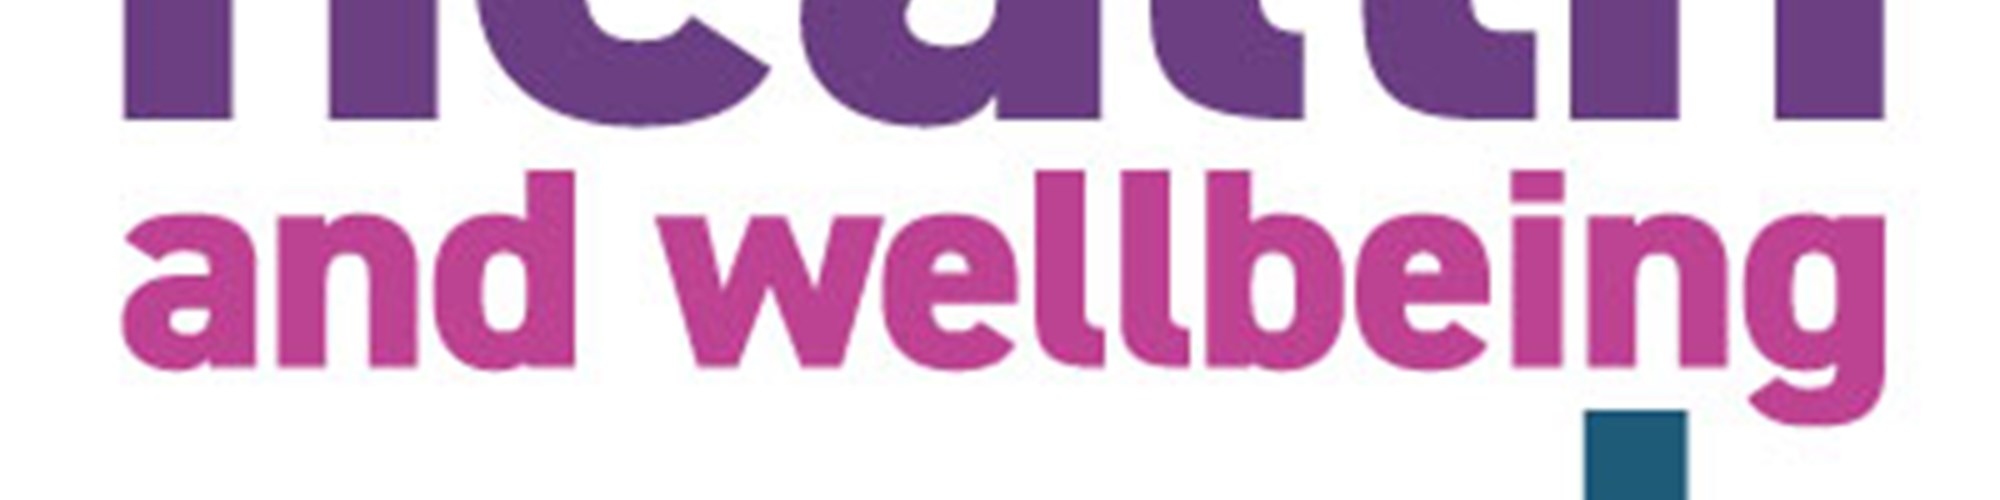 Health & Wellbeing @ Work conference